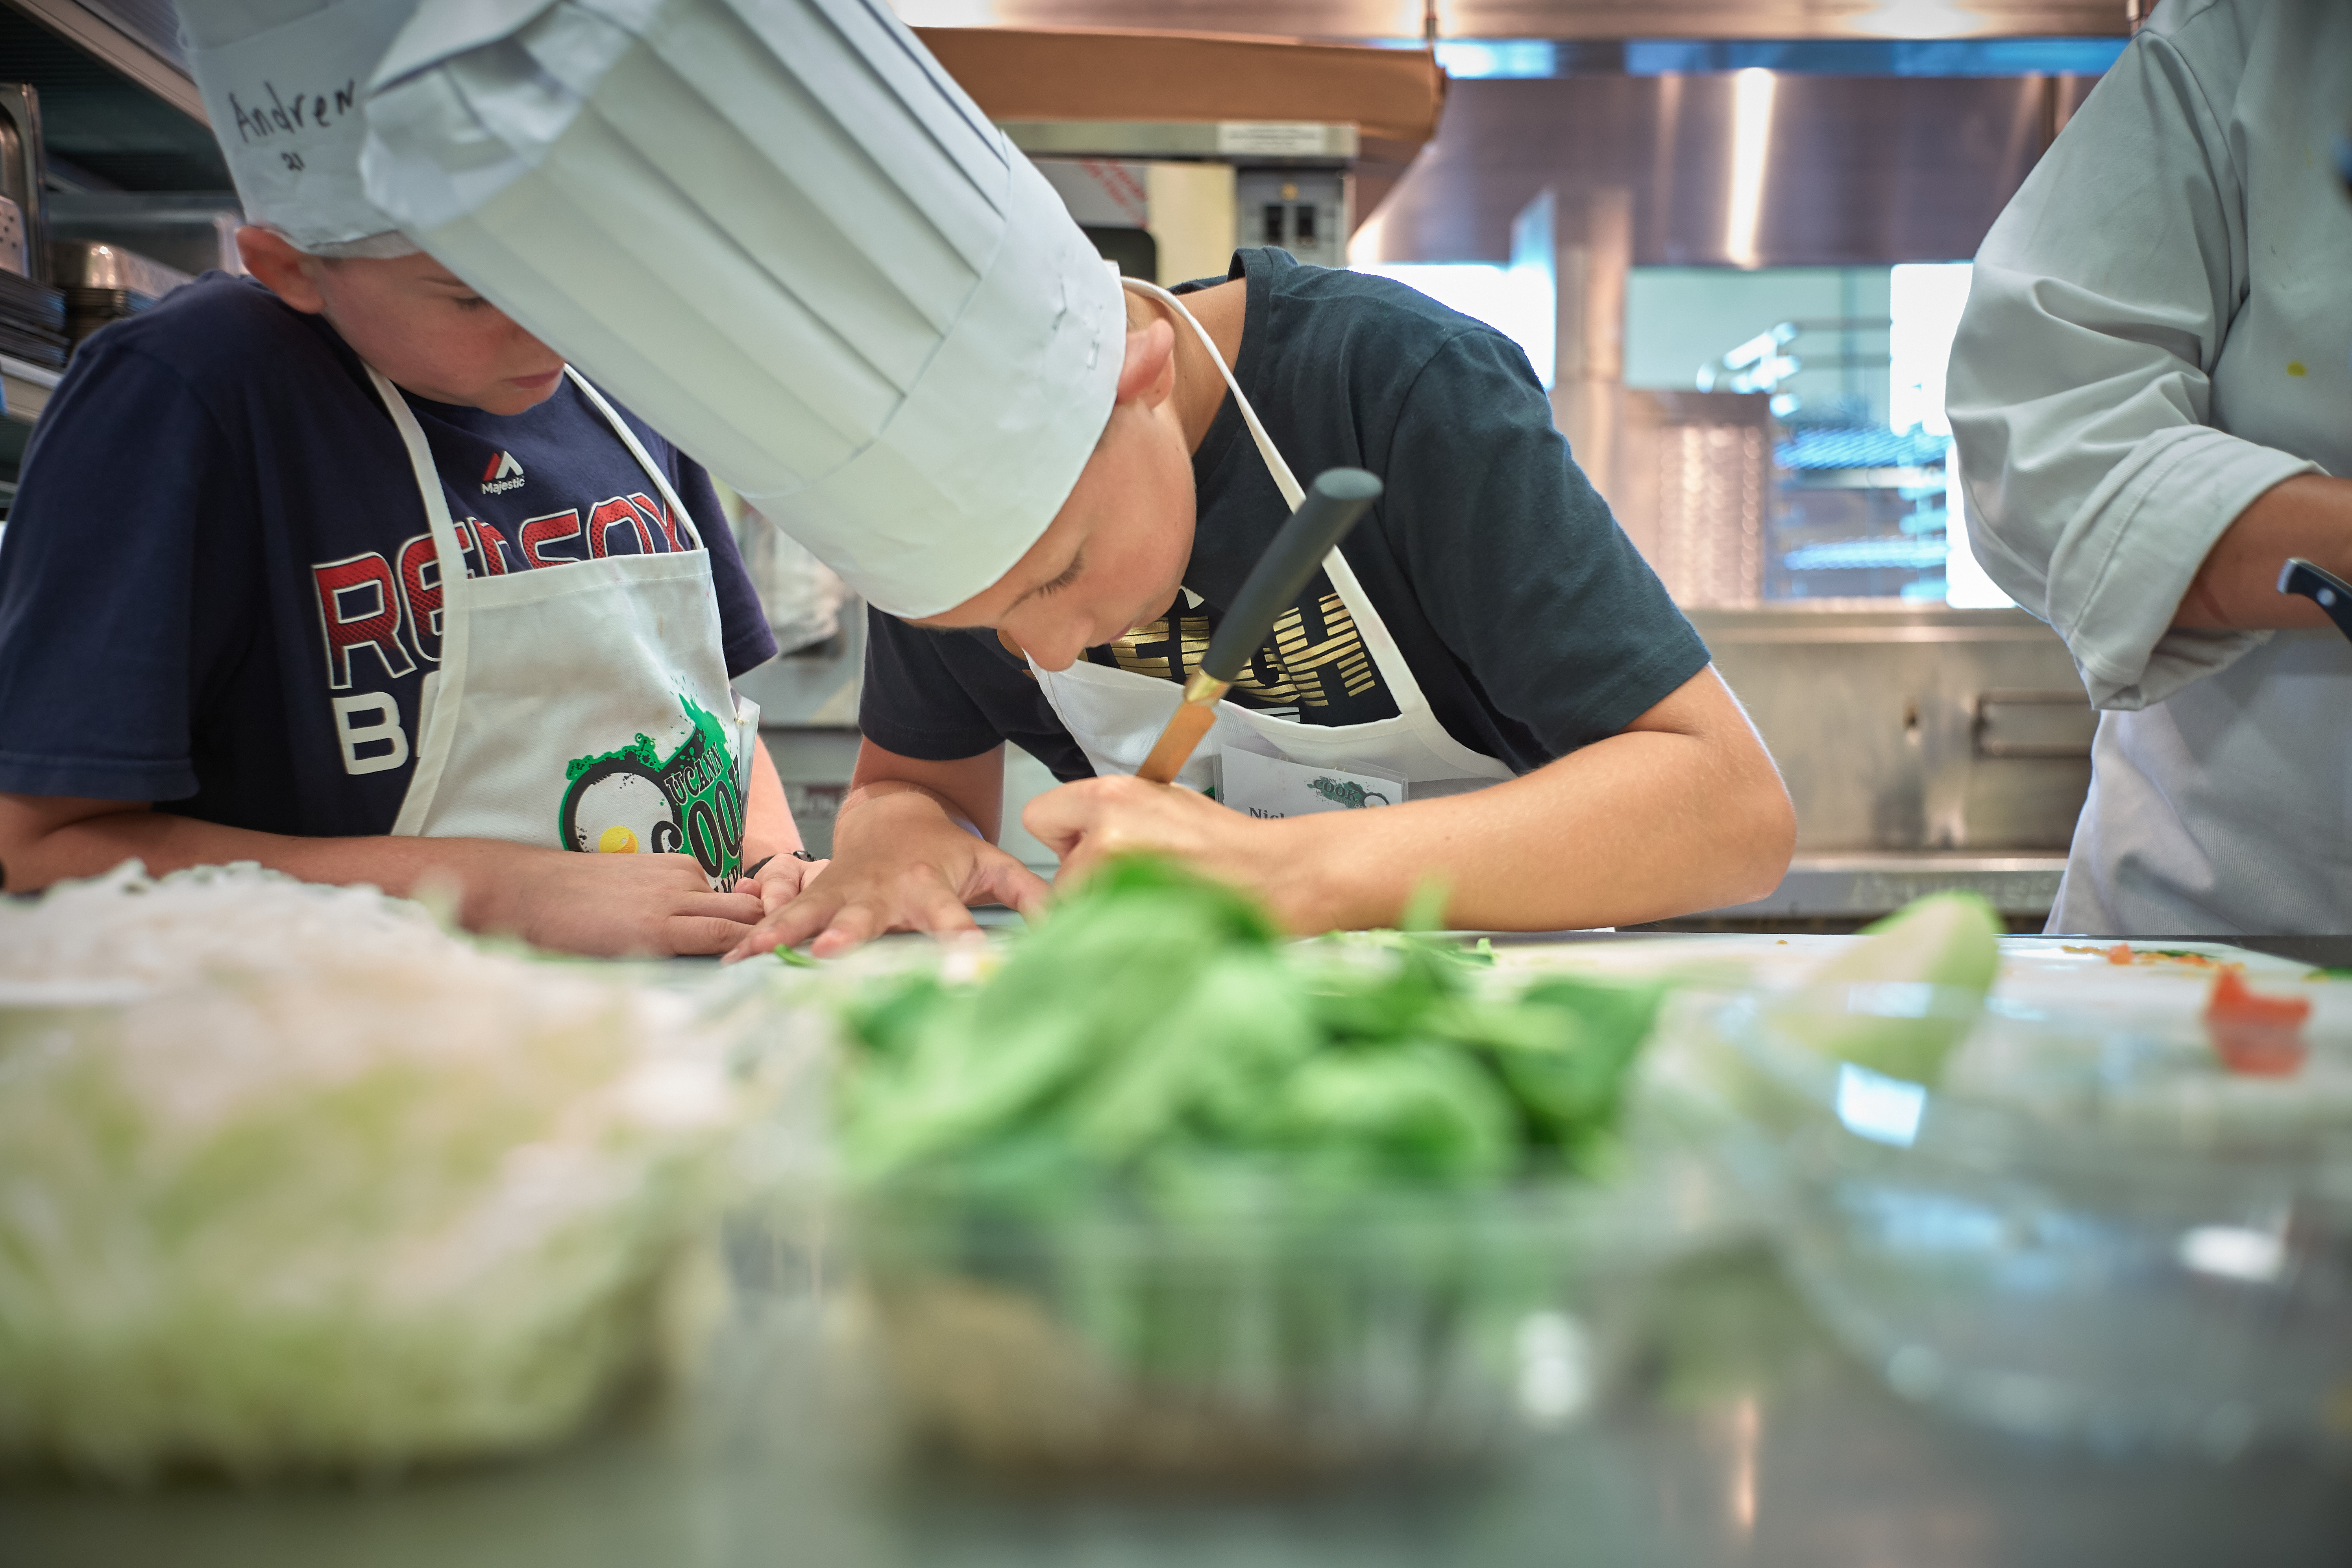 Nick Wigfield, 12, of Baltic, slices cucumbers for a garnish during a competition at the UCann Cook Camp at Gelfenbien Commons on July 18, 2019. (Peter Morenus/UConn Photo)